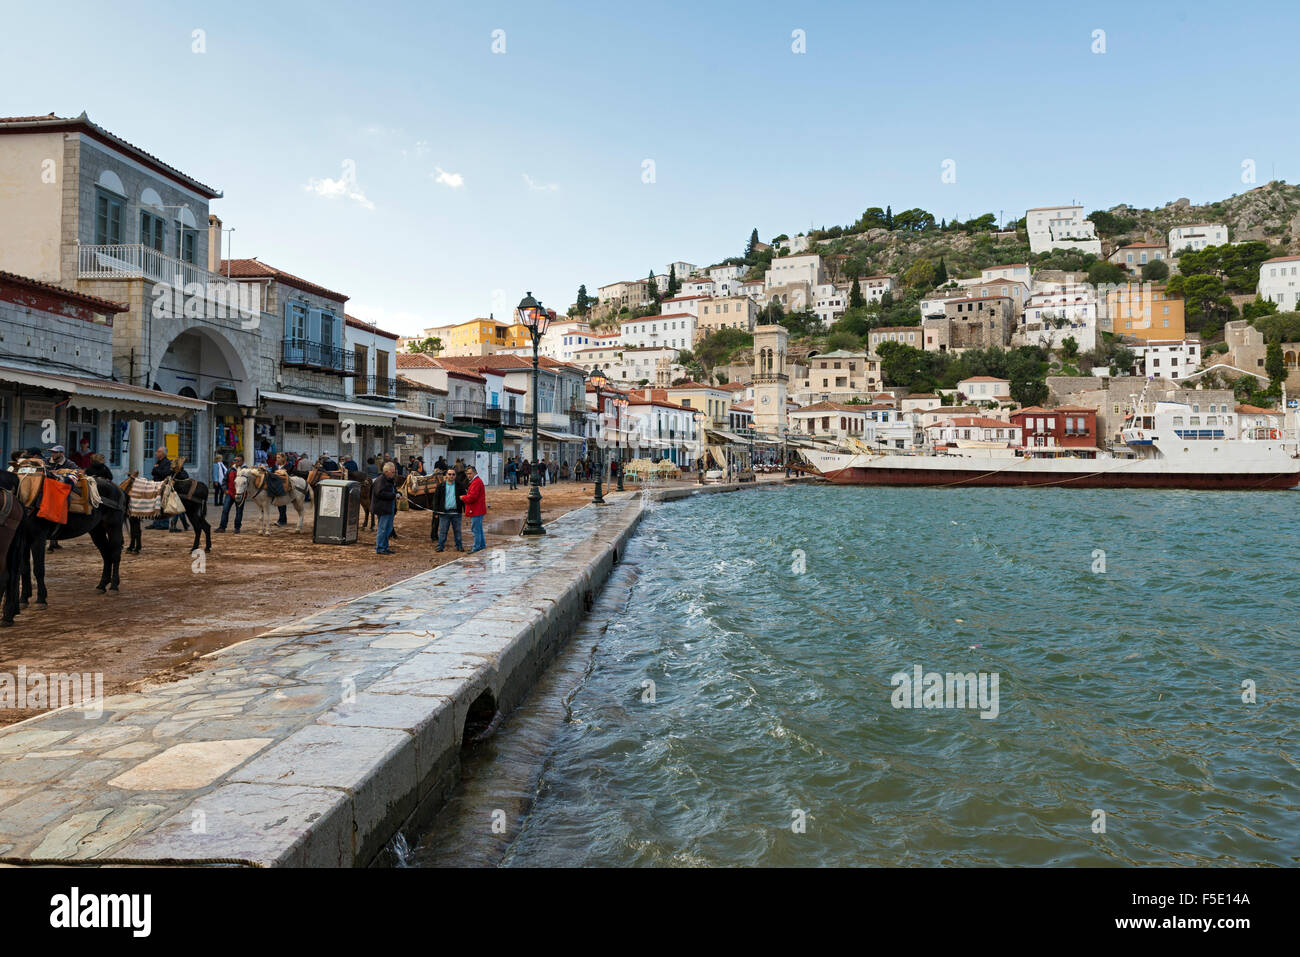 HYDRA, GREECE - OCTOBER 25, 2015: People in the harbor of the city of Hydra, Greece Stock Photo